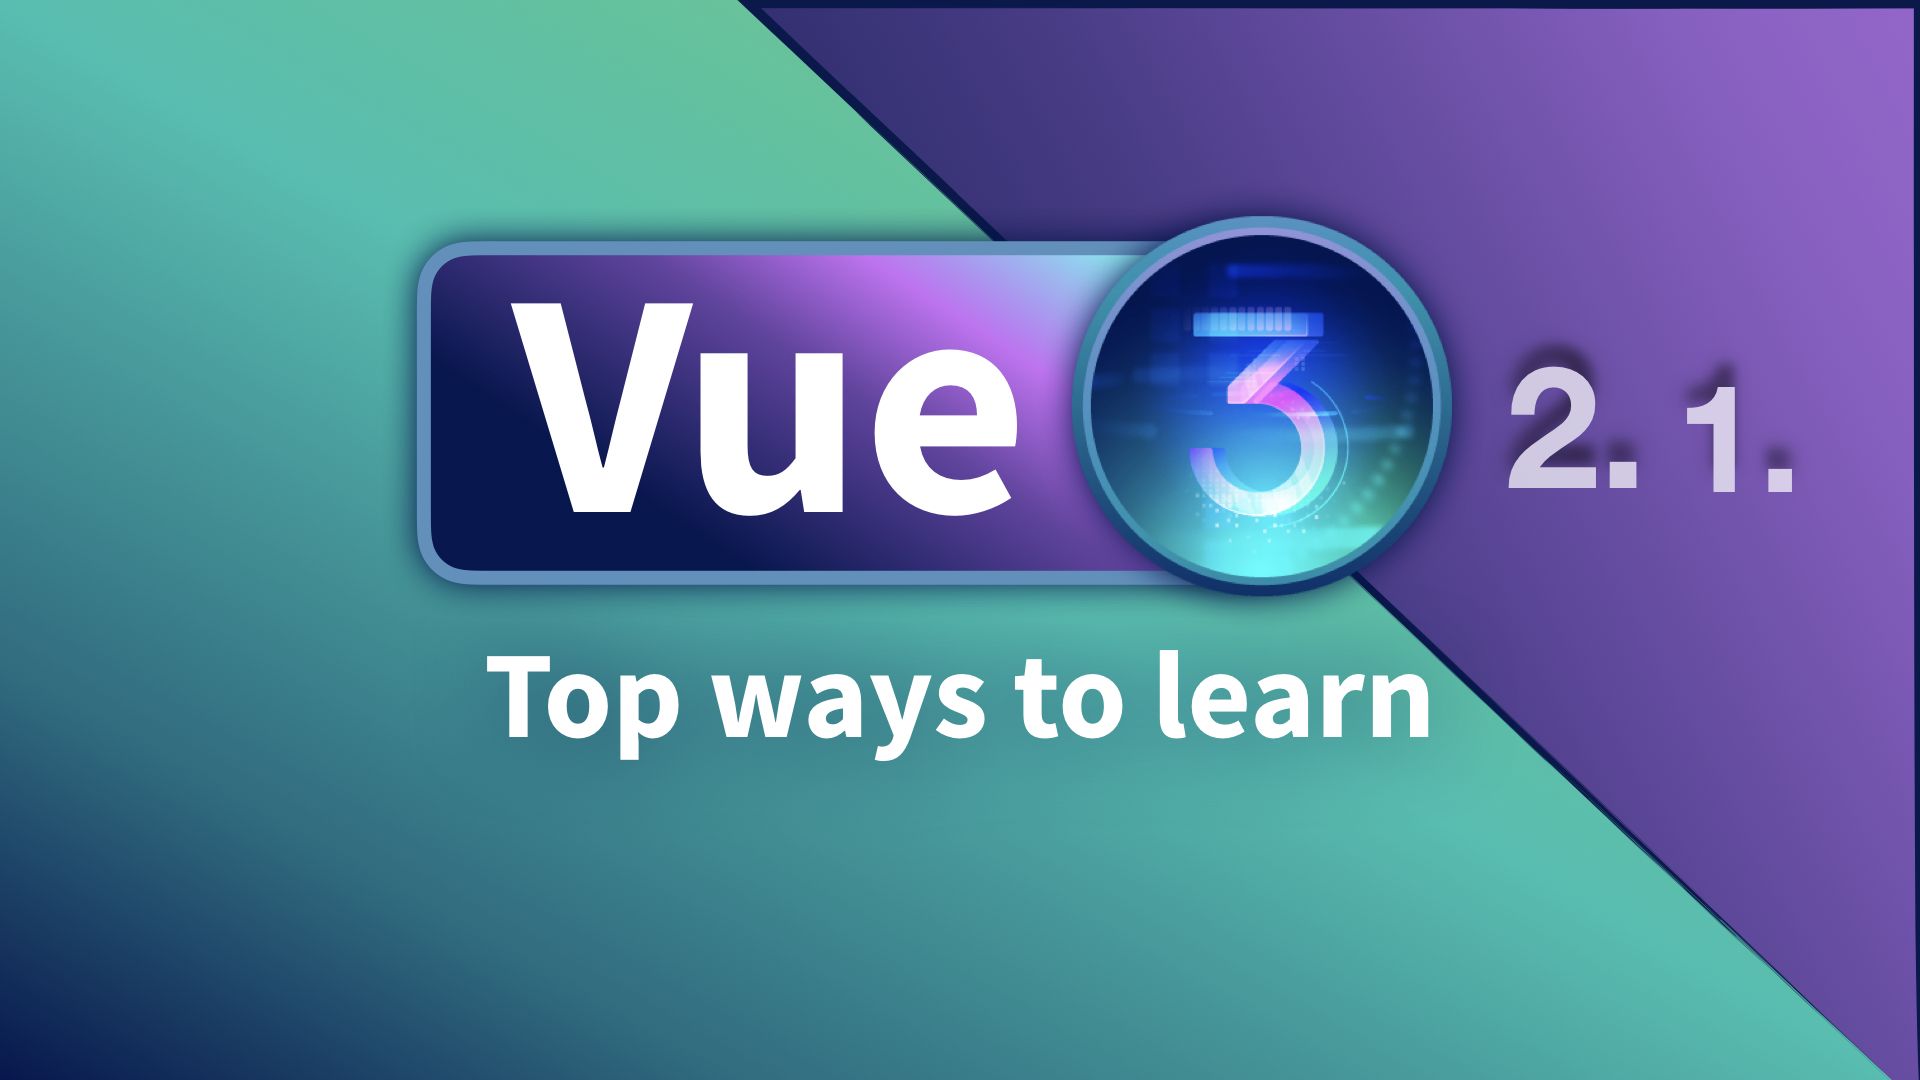 Top ways to learn Vue 3